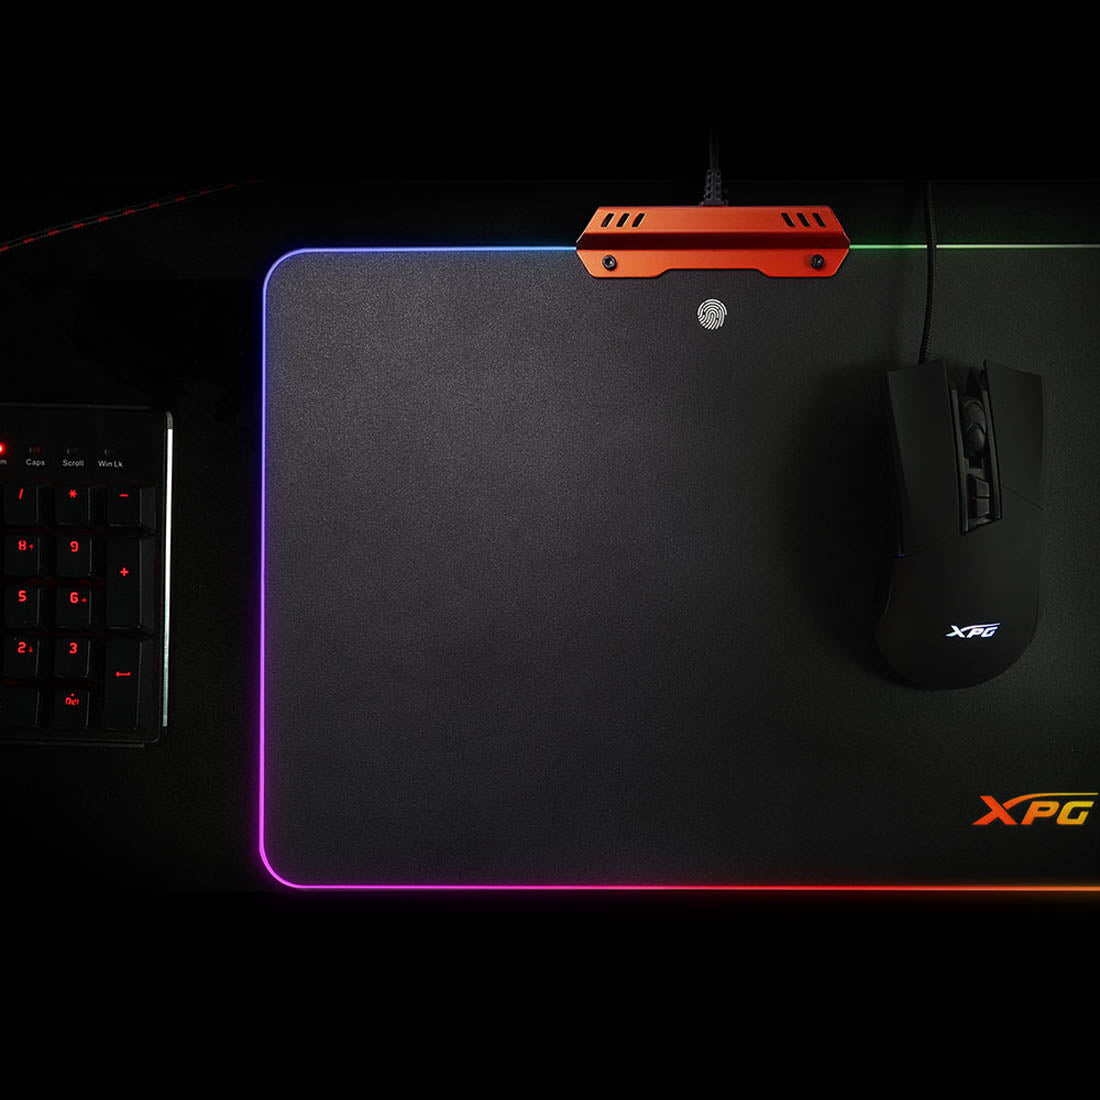 XPG INFAREX R10 Gaming Mousepad and INFAREX M10 Mouse Combo with Adjustable DPI up to 3200